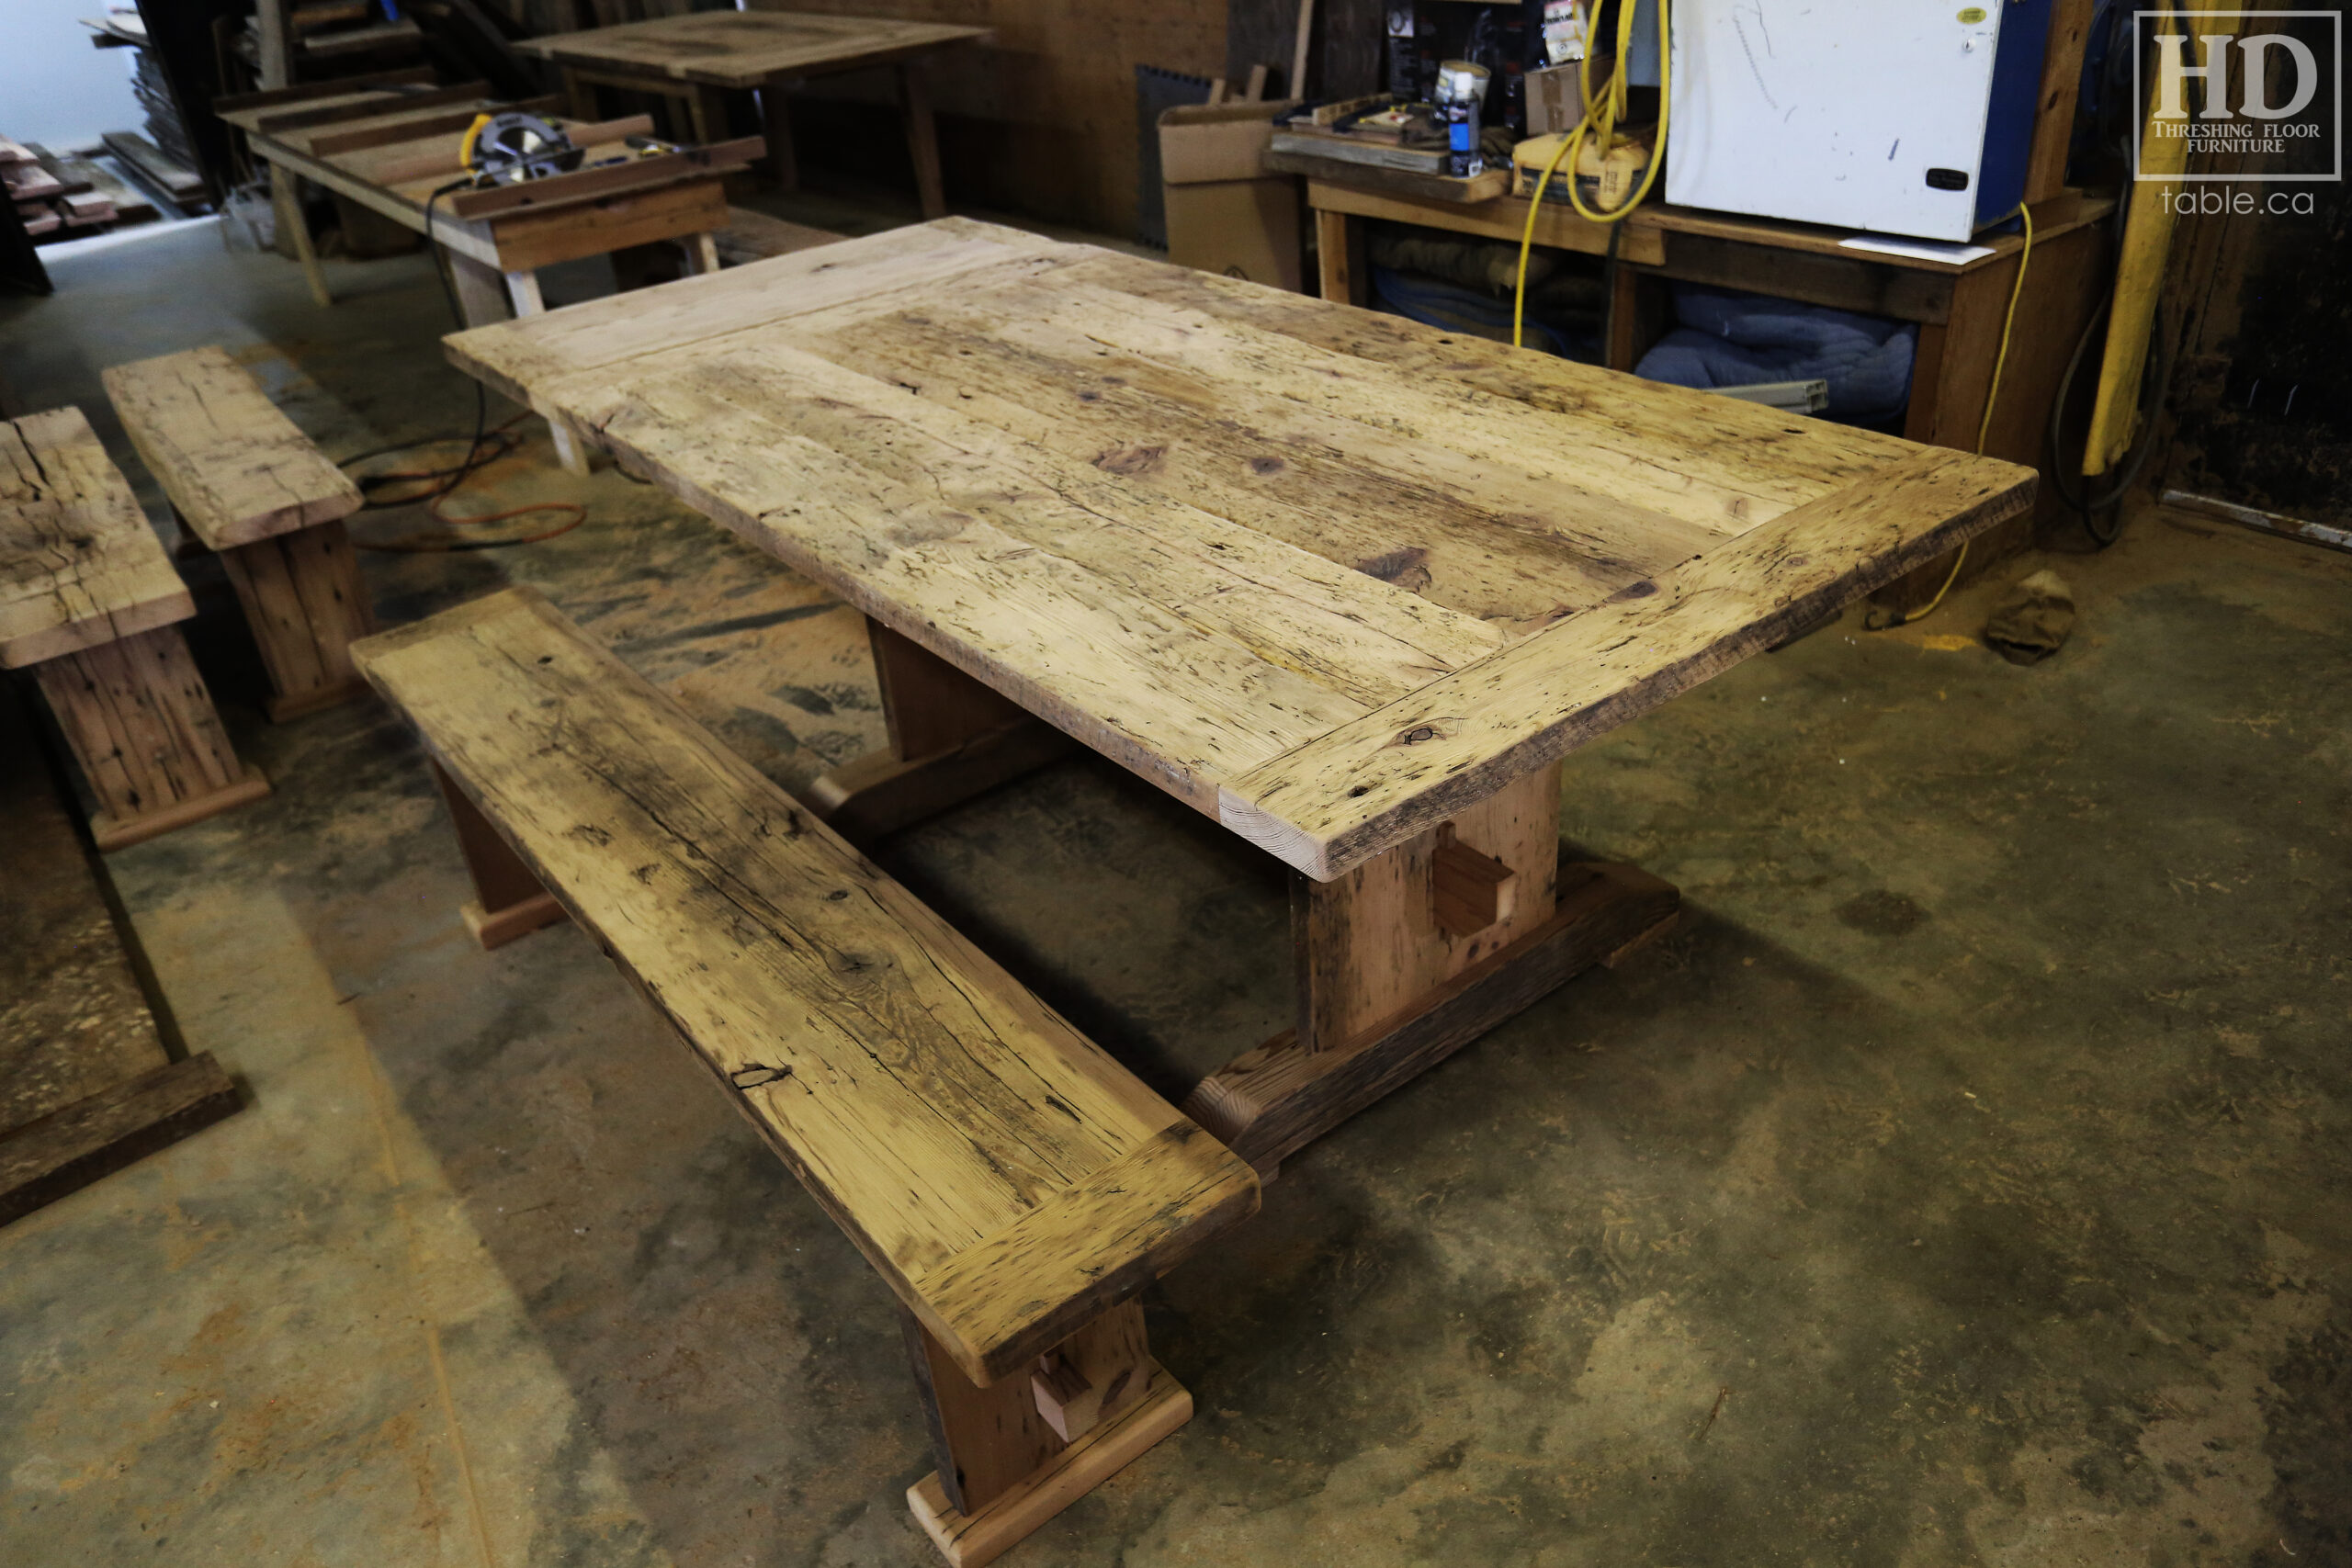 Reclaimed Wood Table & Bench by HD Threshing Floor Furniture / www.table.ca 